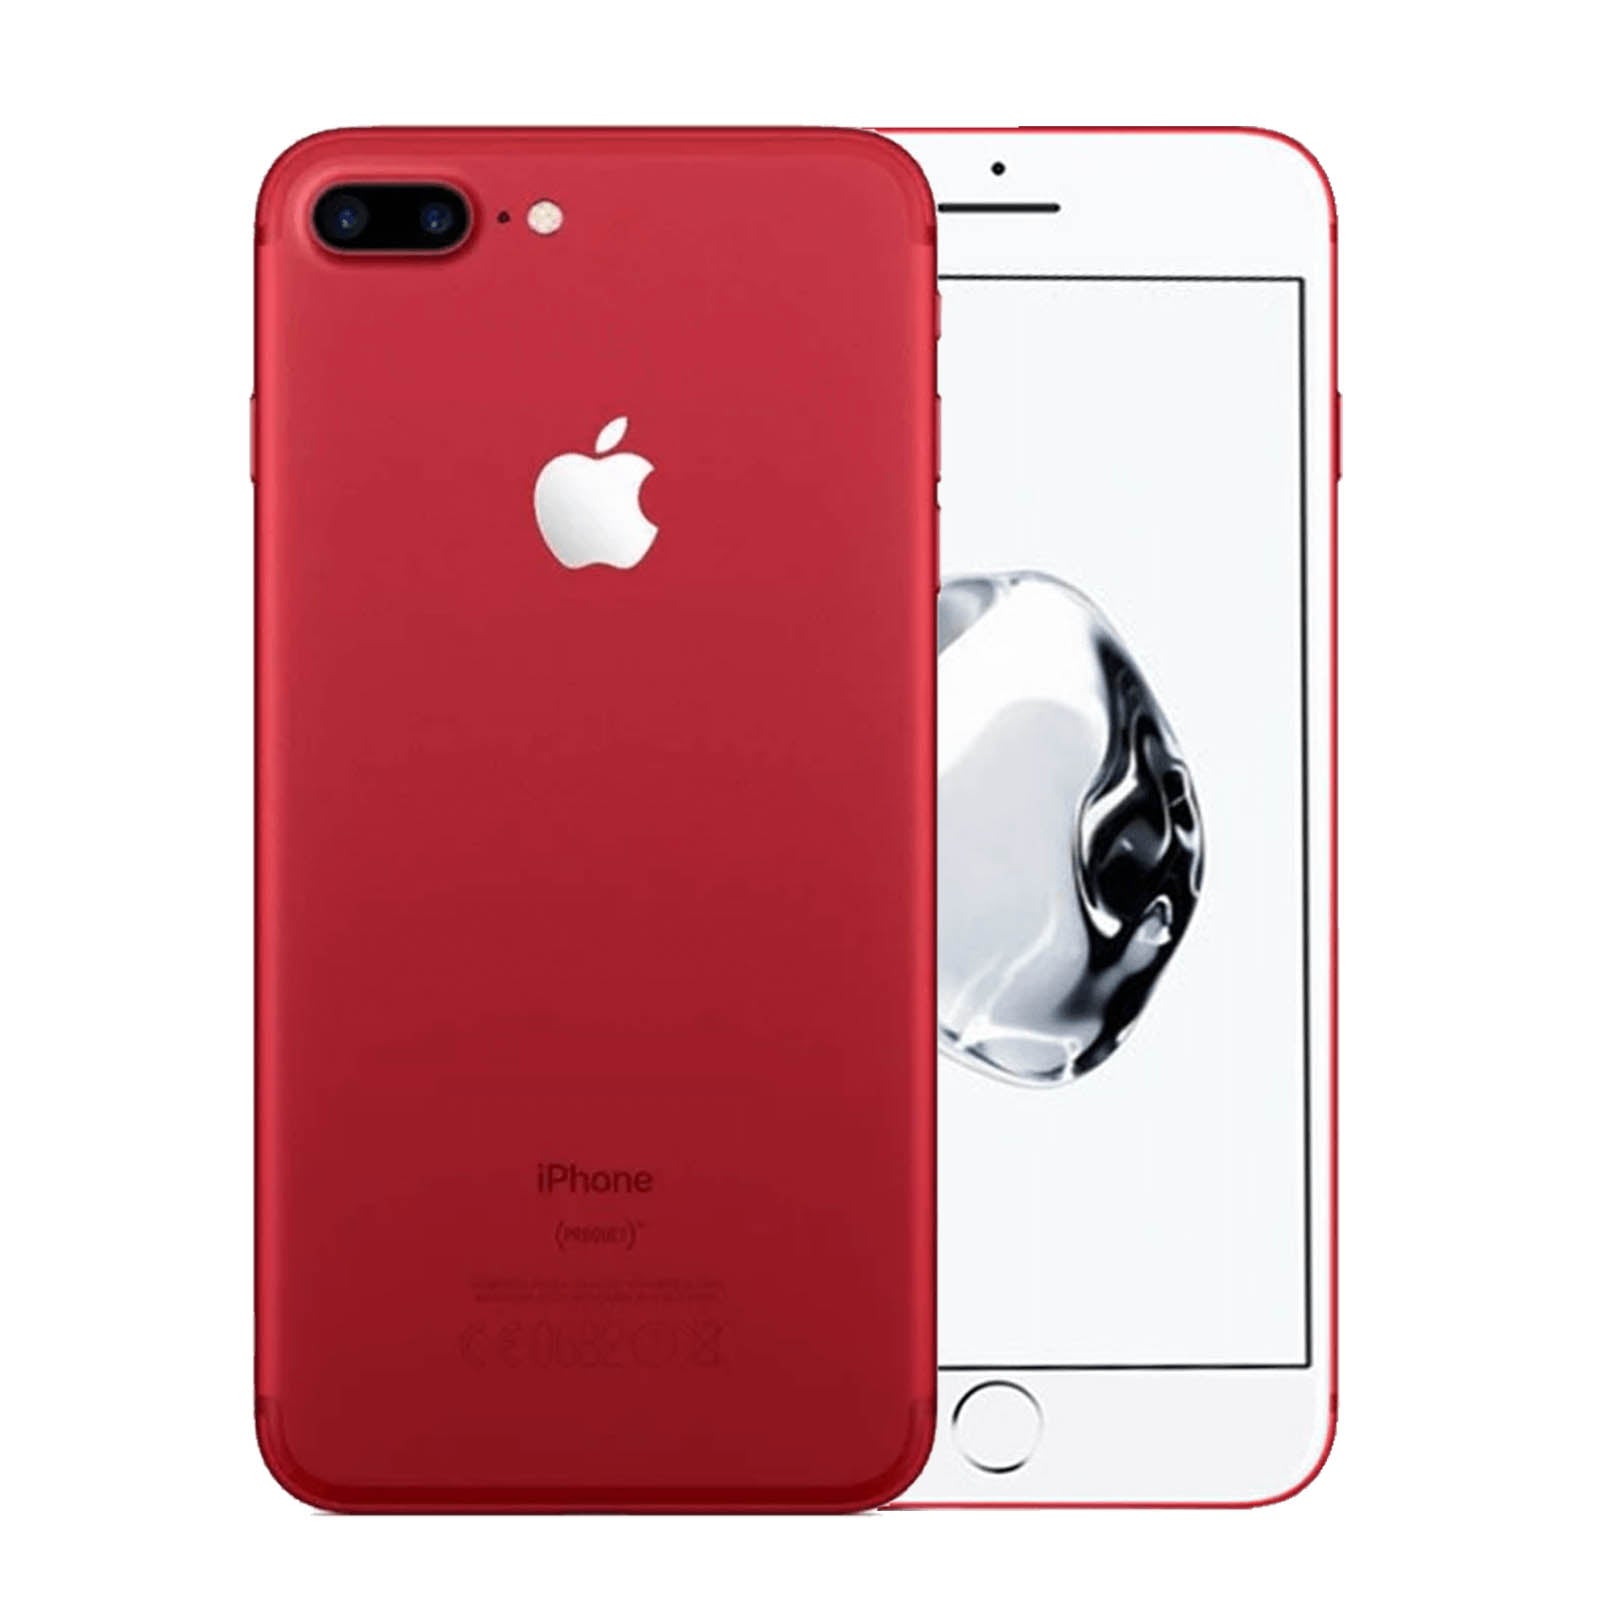 Apple iPhone 7 Plus 128GB Product Red Very Good - Unlocked